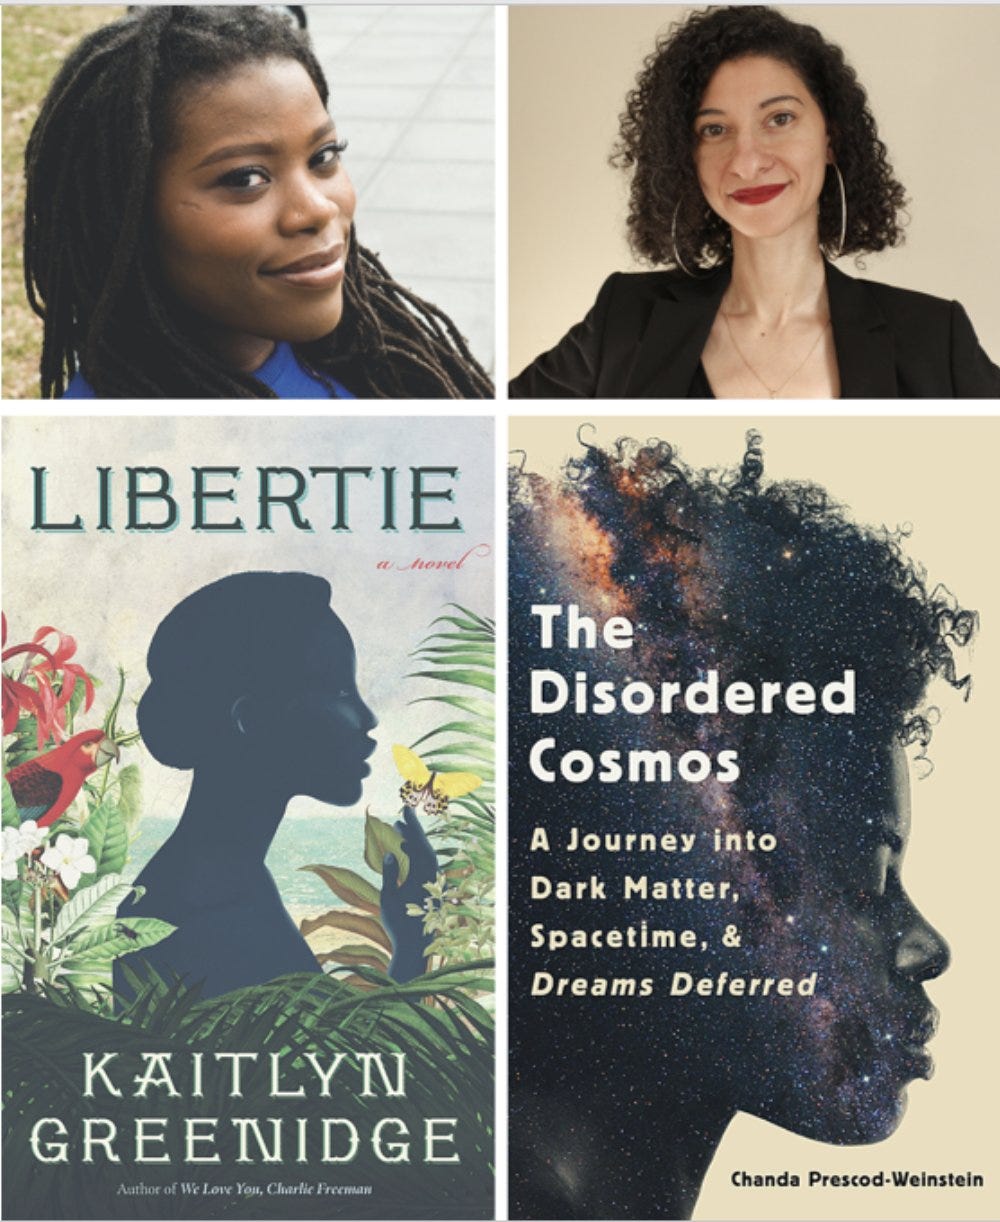 a photo of Kaitlyn Greenidge, a photo of me, and the cover of Libertie and the cover of The Disordered Cosmos